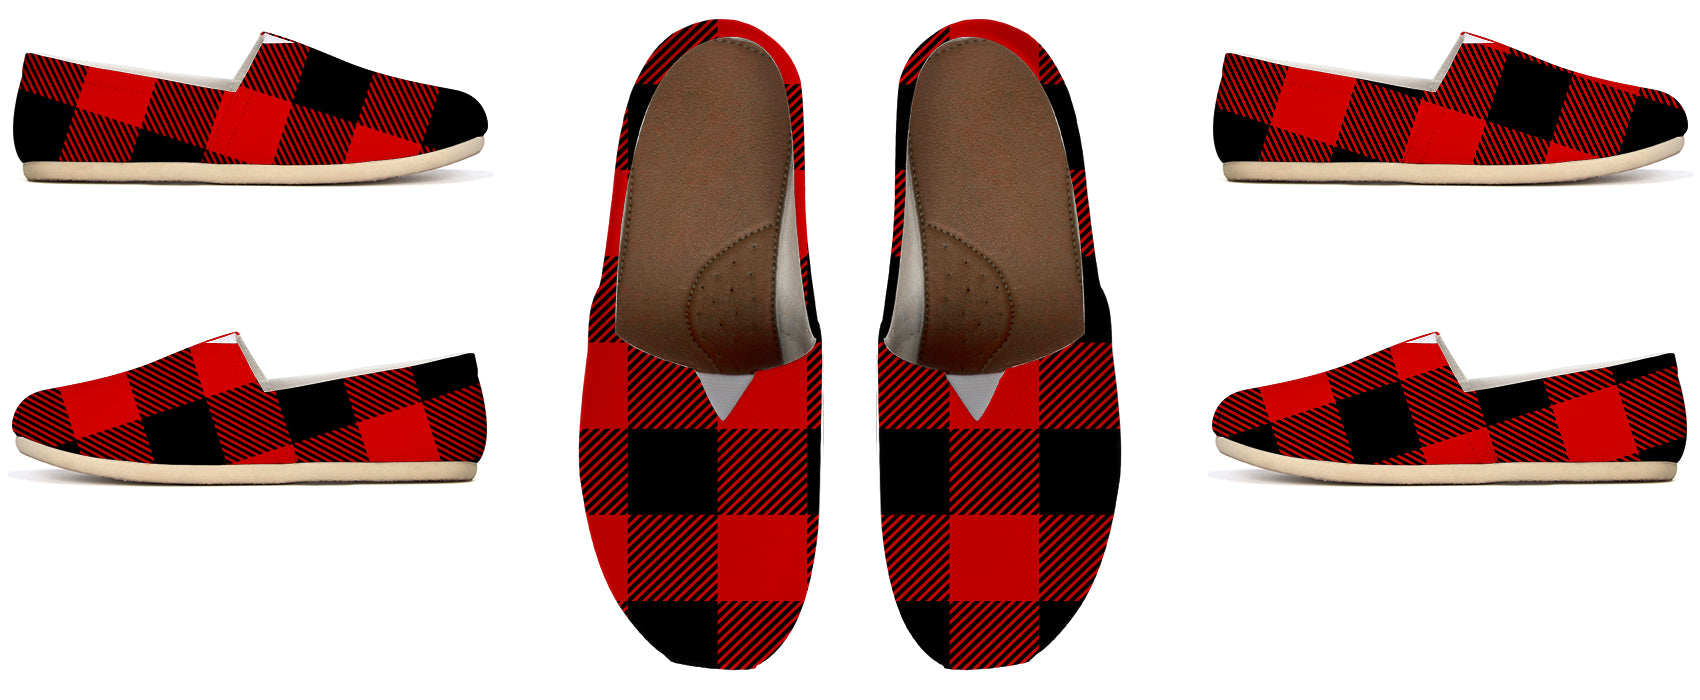 Red and Black Buffalo Check Plaid Women 